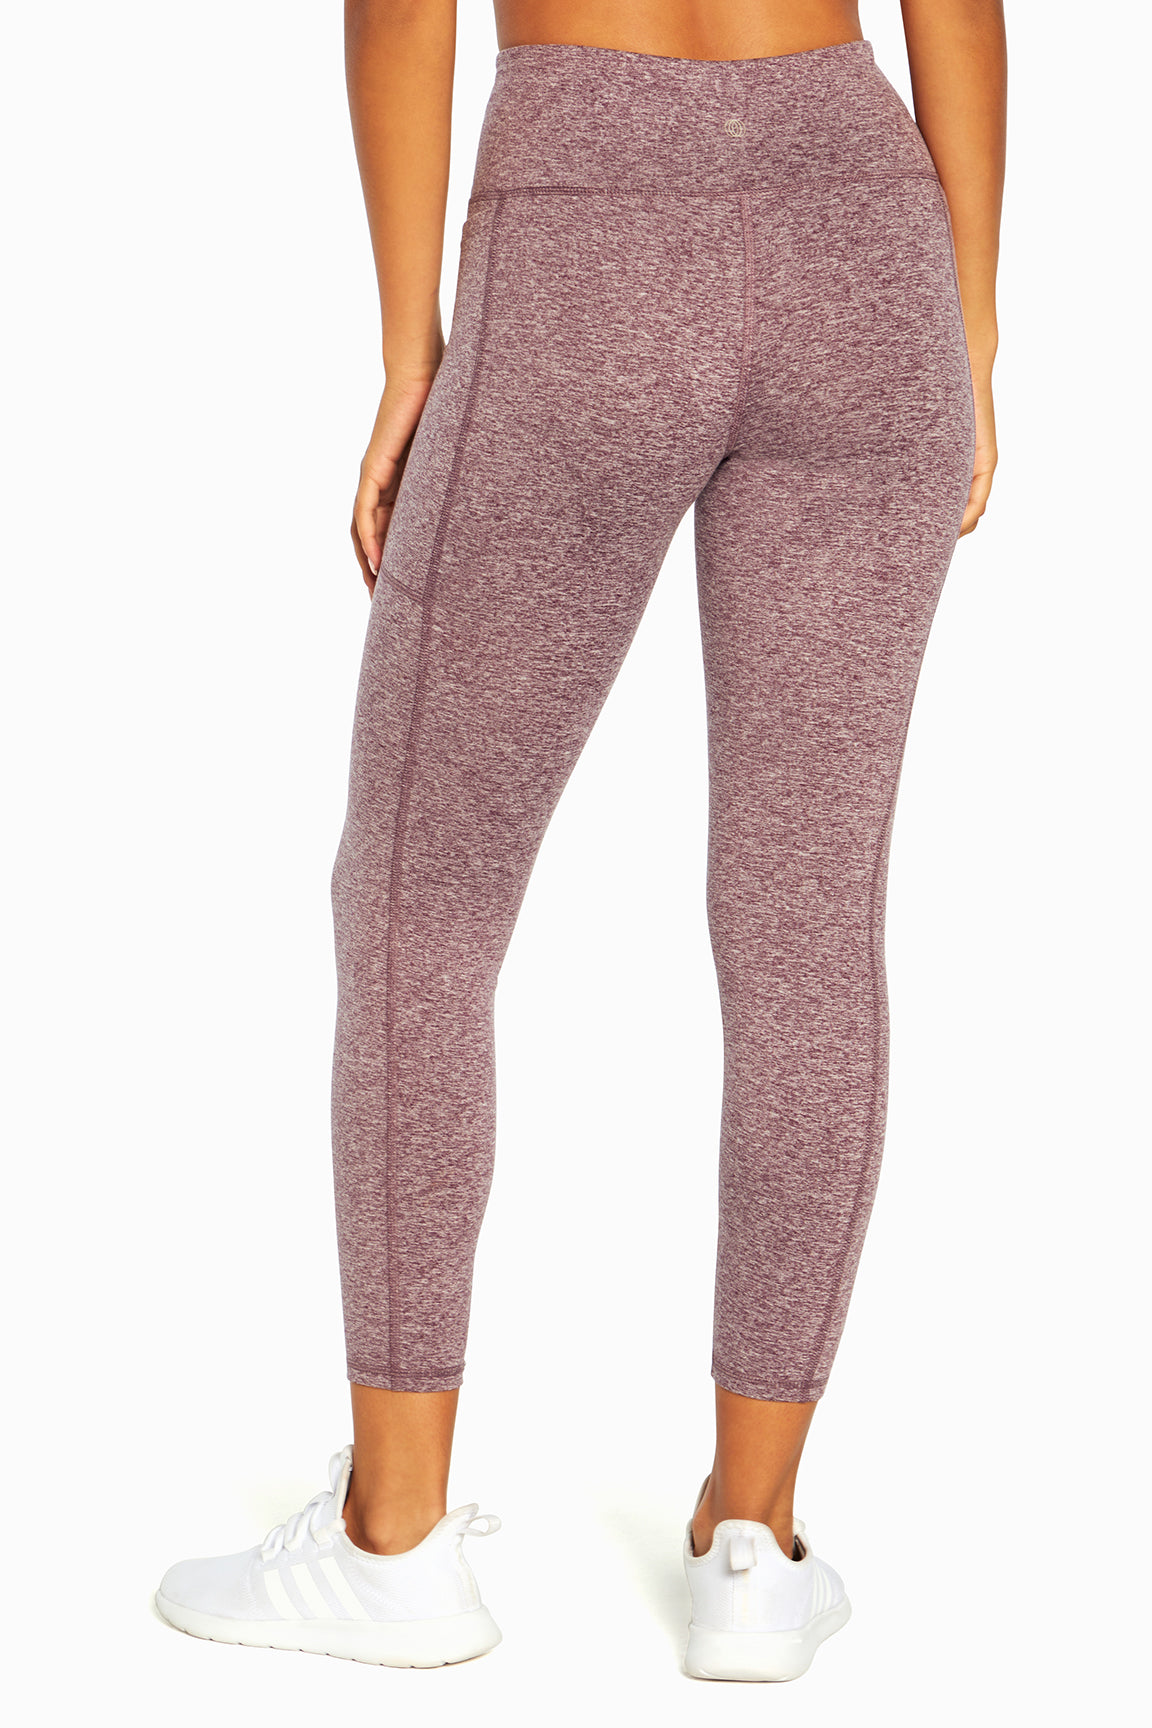 12 Of The Best Leggings You Can Buy In Canada From Brands Like Aritzia &  Lululemon - Narcity